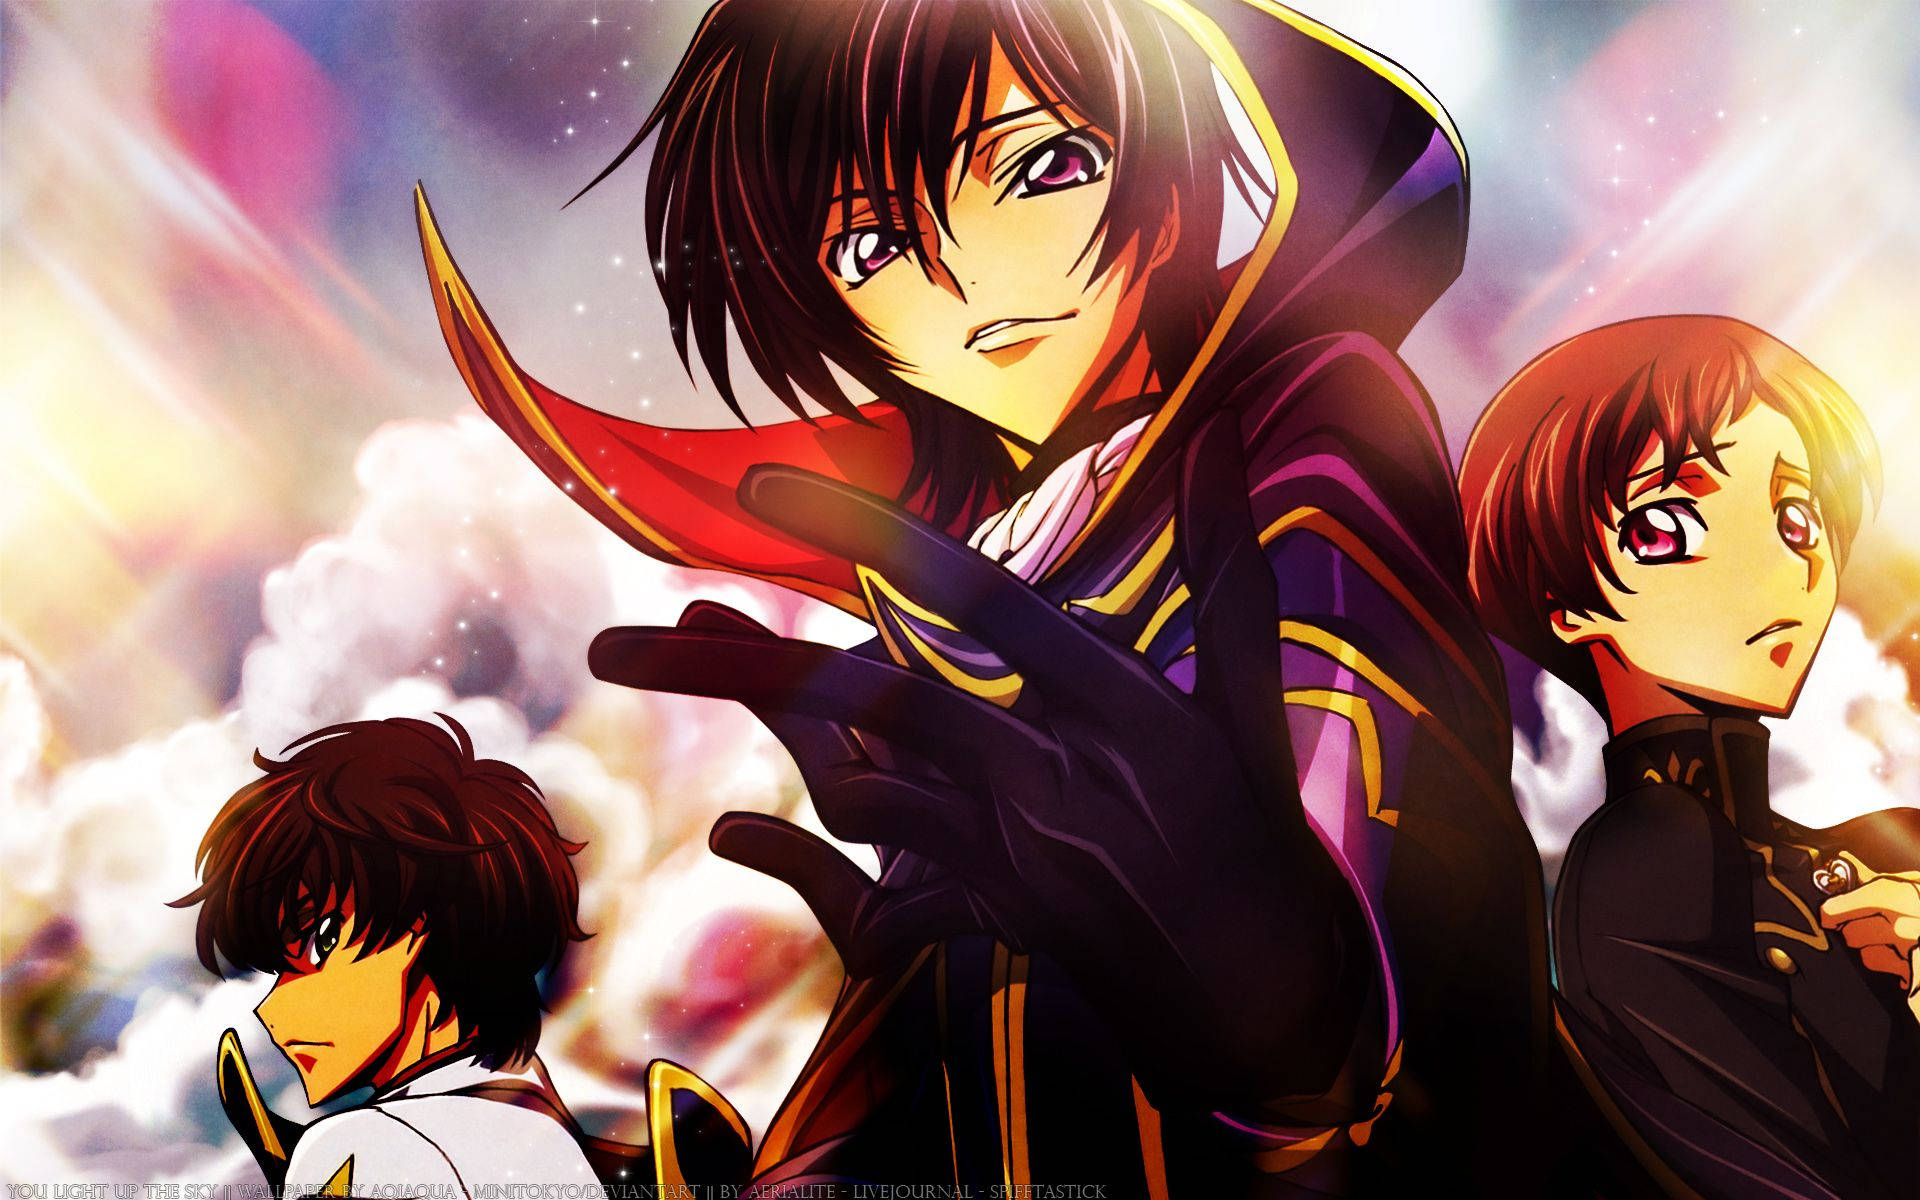 Lelouch, the main protagonist of Code Geass, smirks as he prepares to face a challenge. Wallpaper